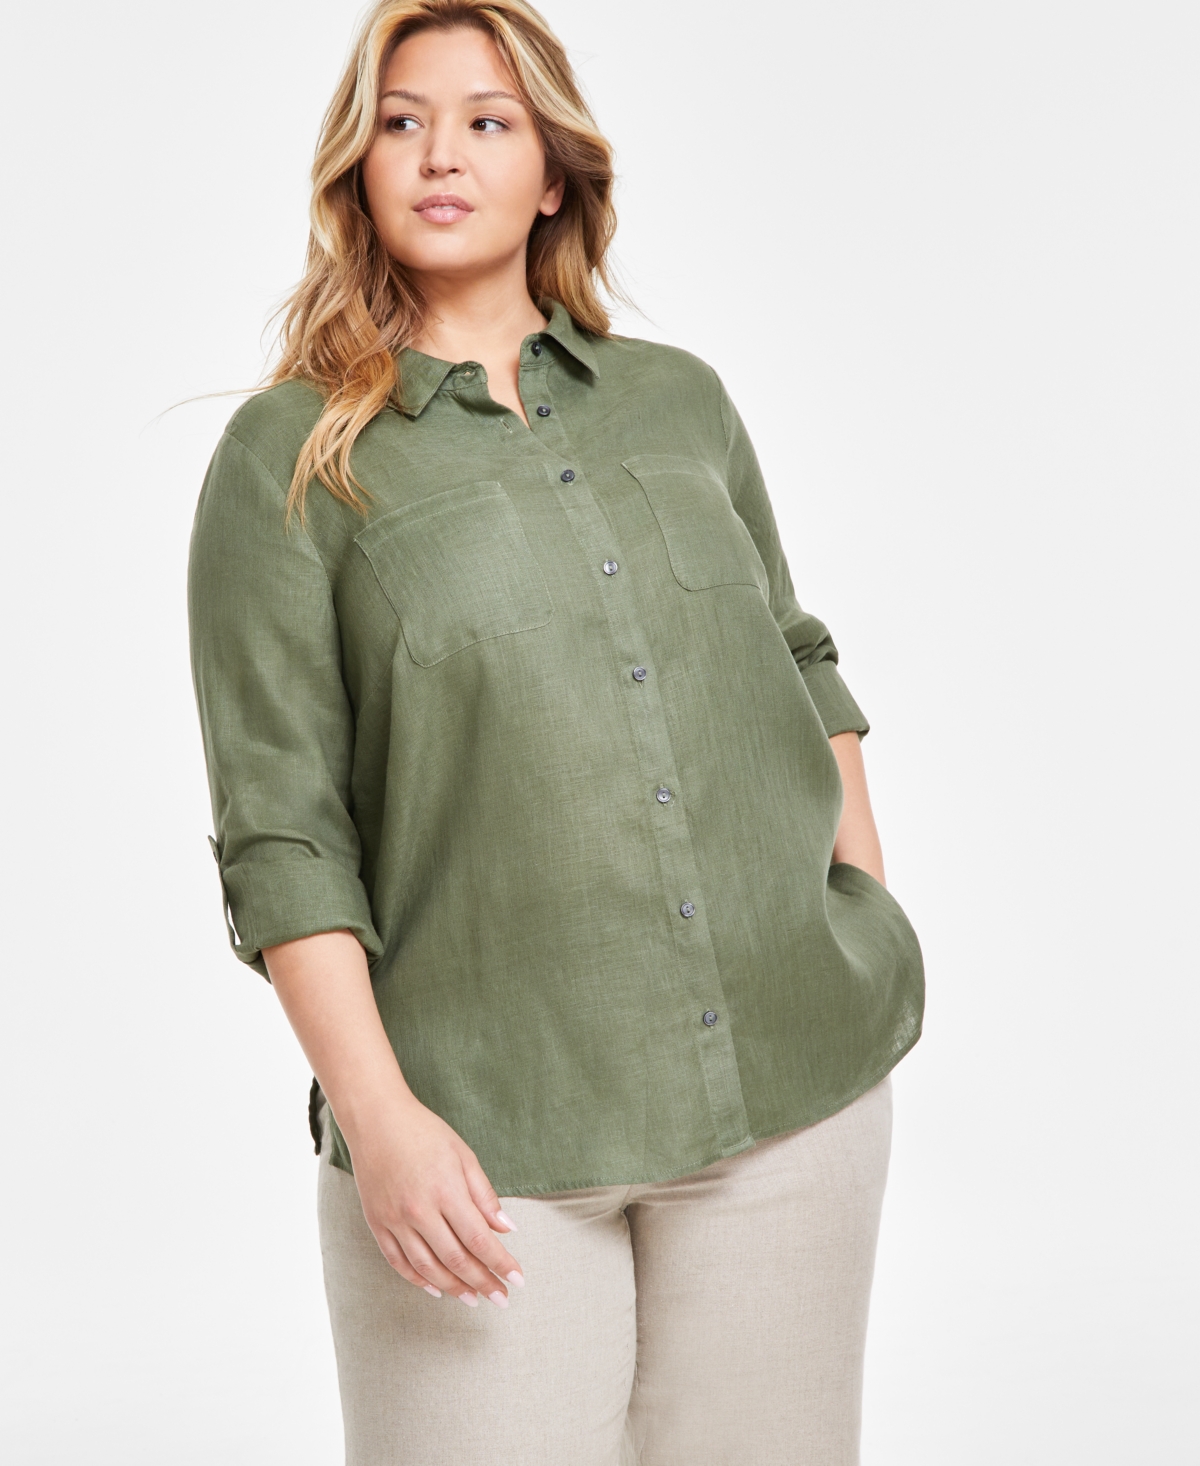 Plus Size 100% Linen Roll-Tab Shirt, Created for Macy's - Bright White